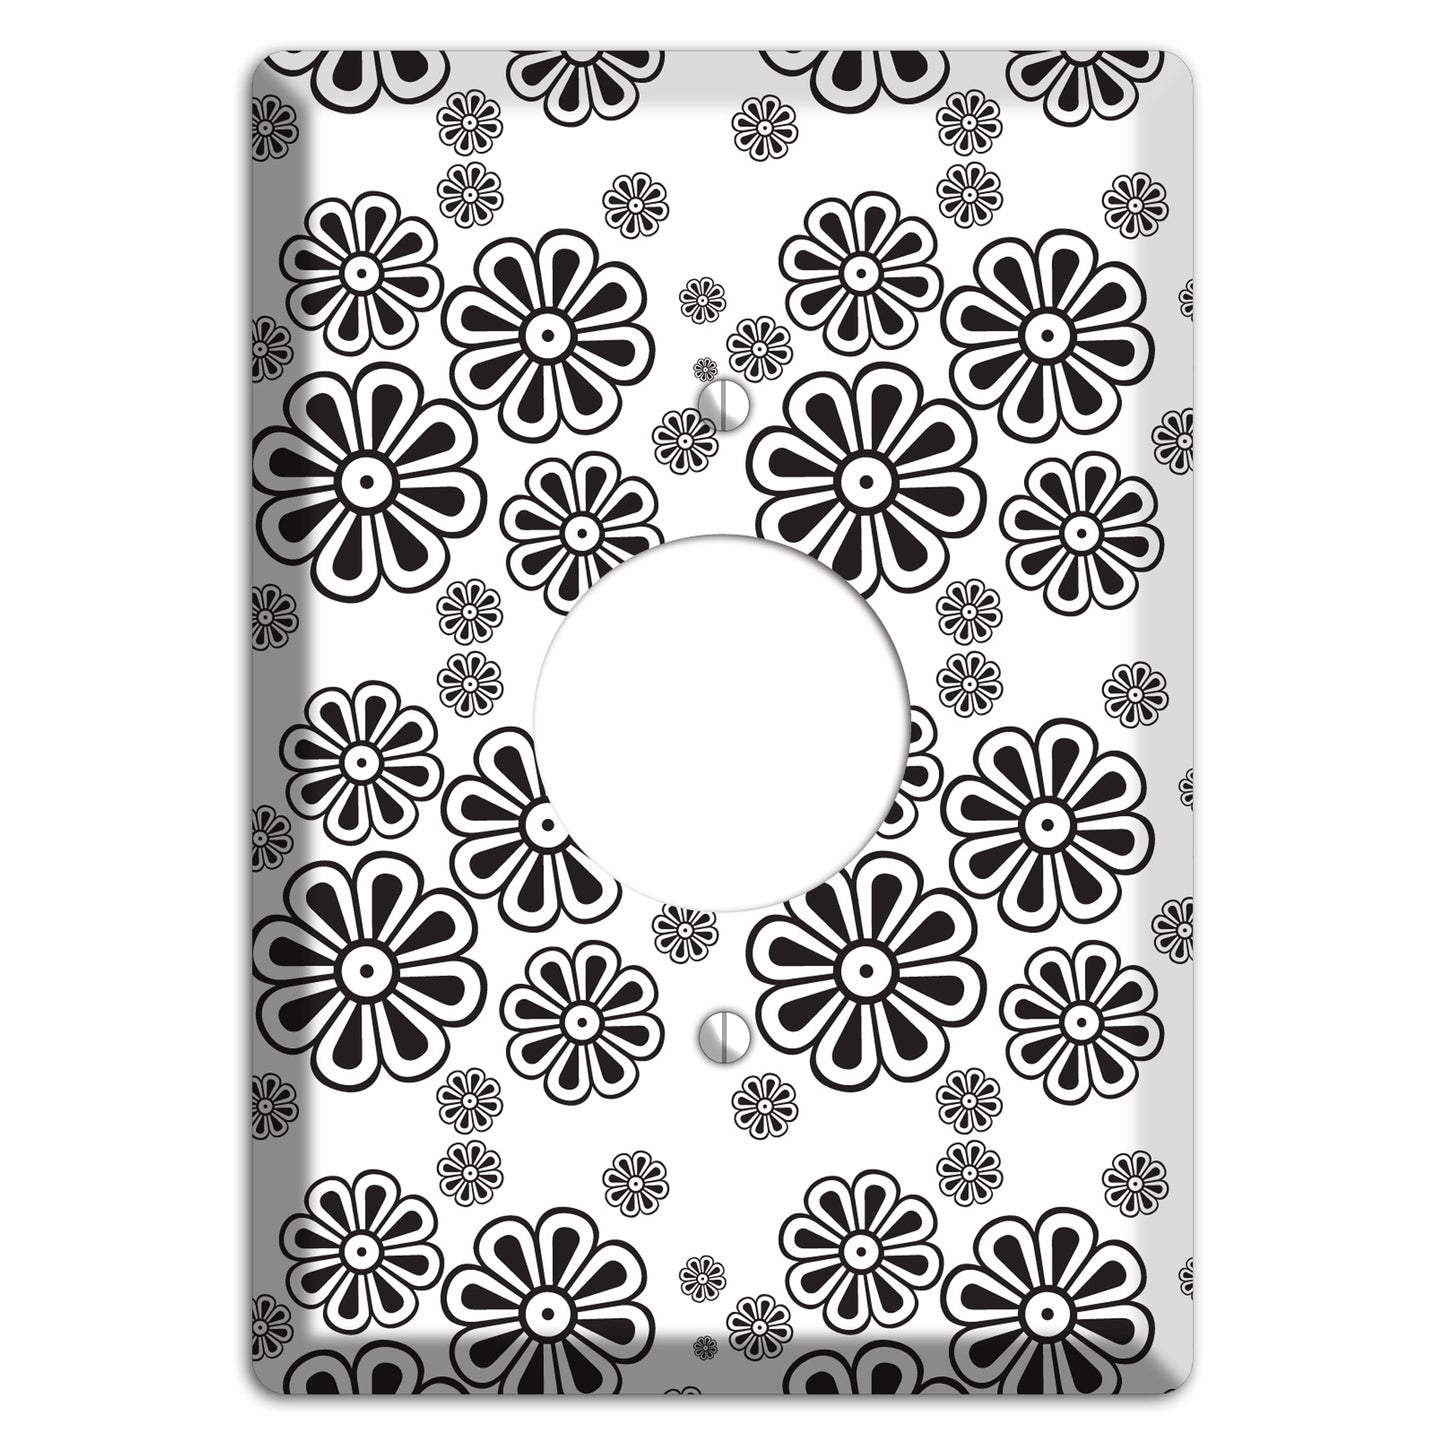 White With Black Small Retro Floral Contour Single Receptacle Wallplate